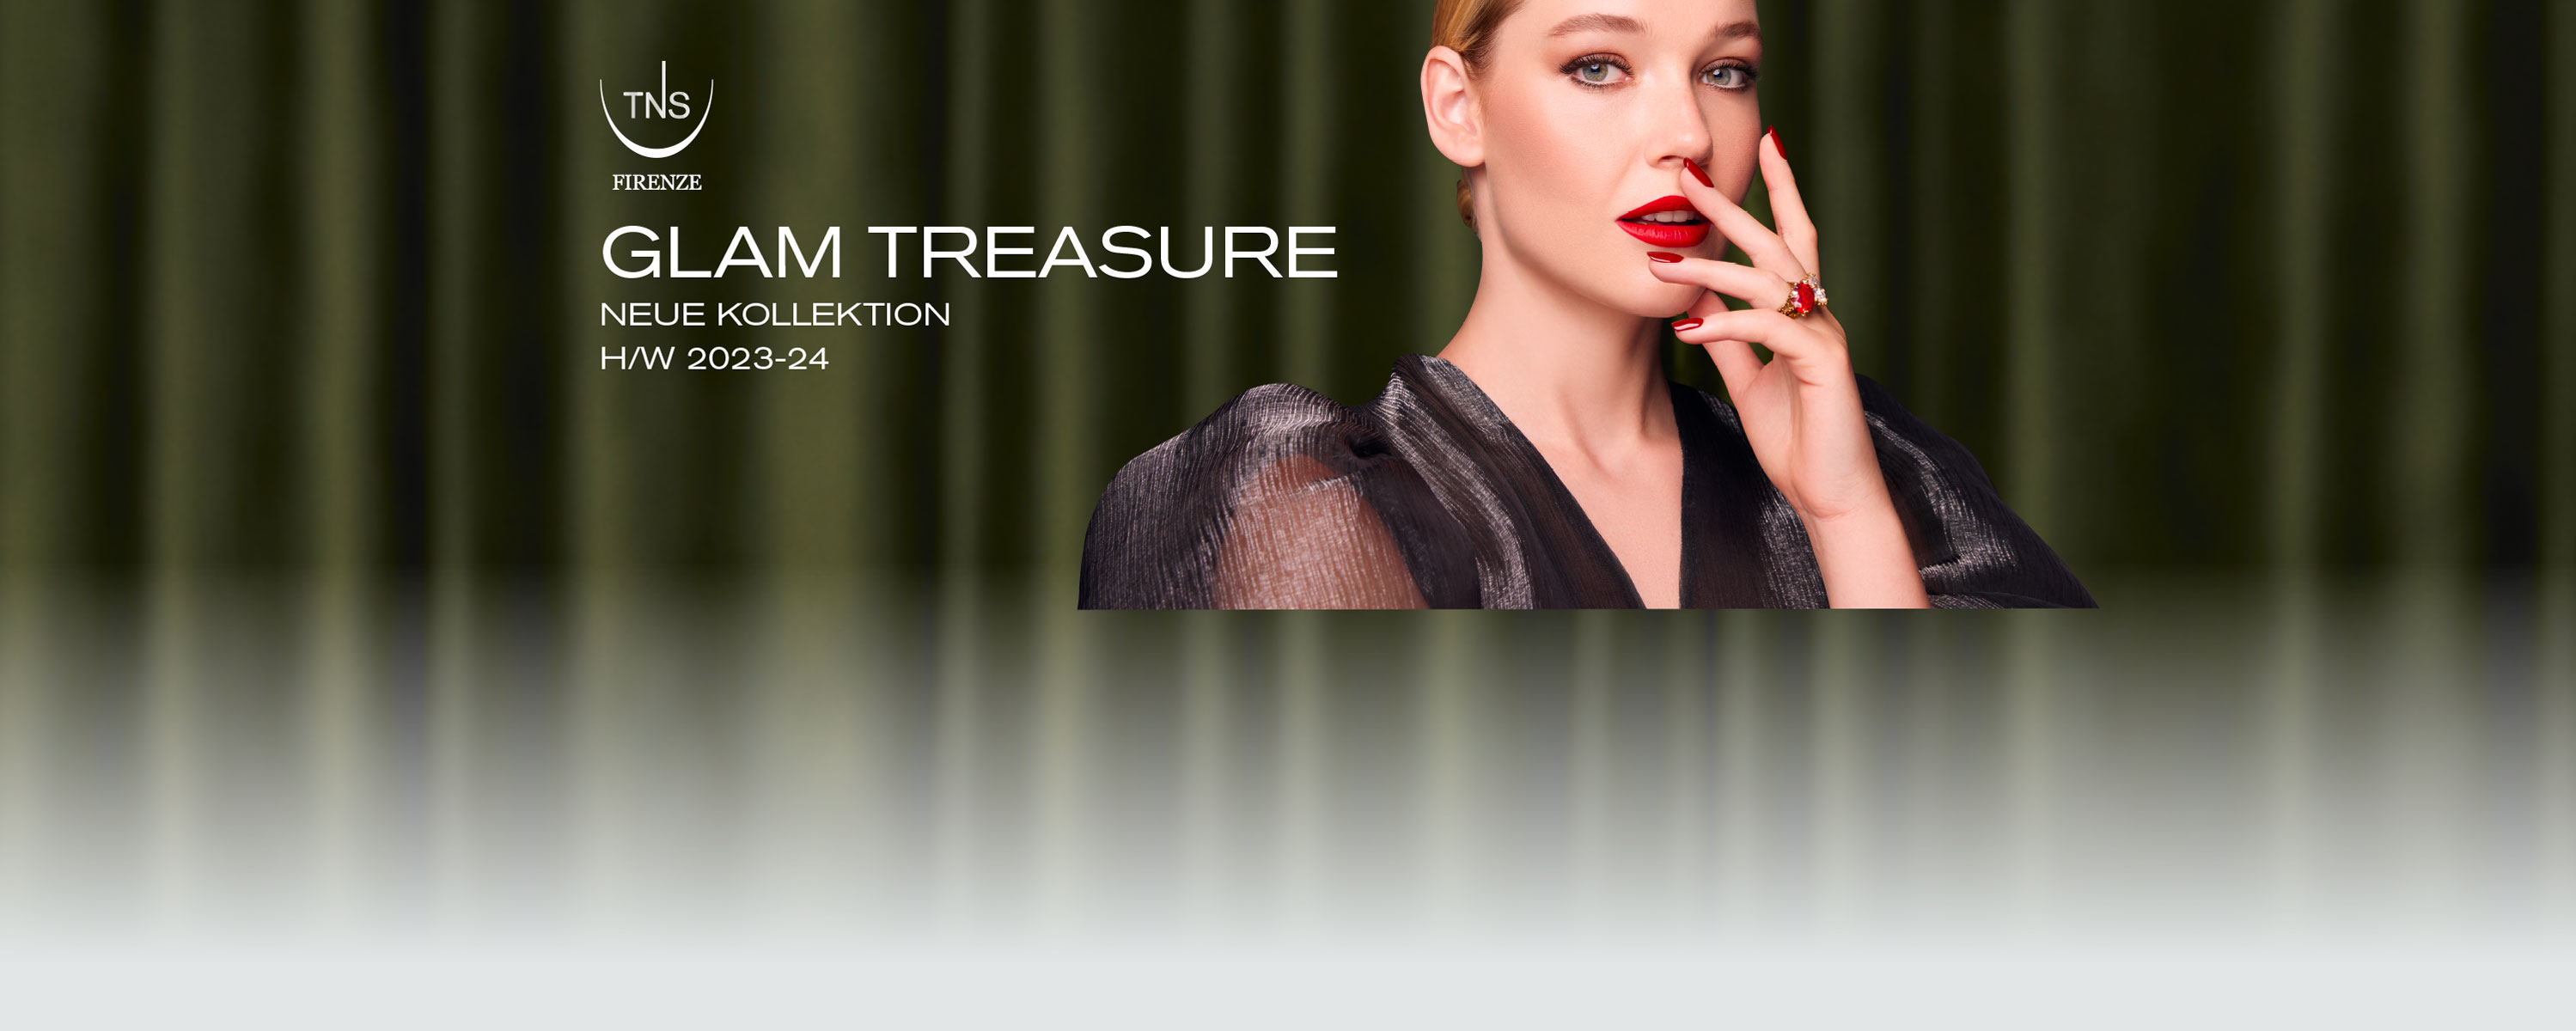 Glam Treasure New Collection